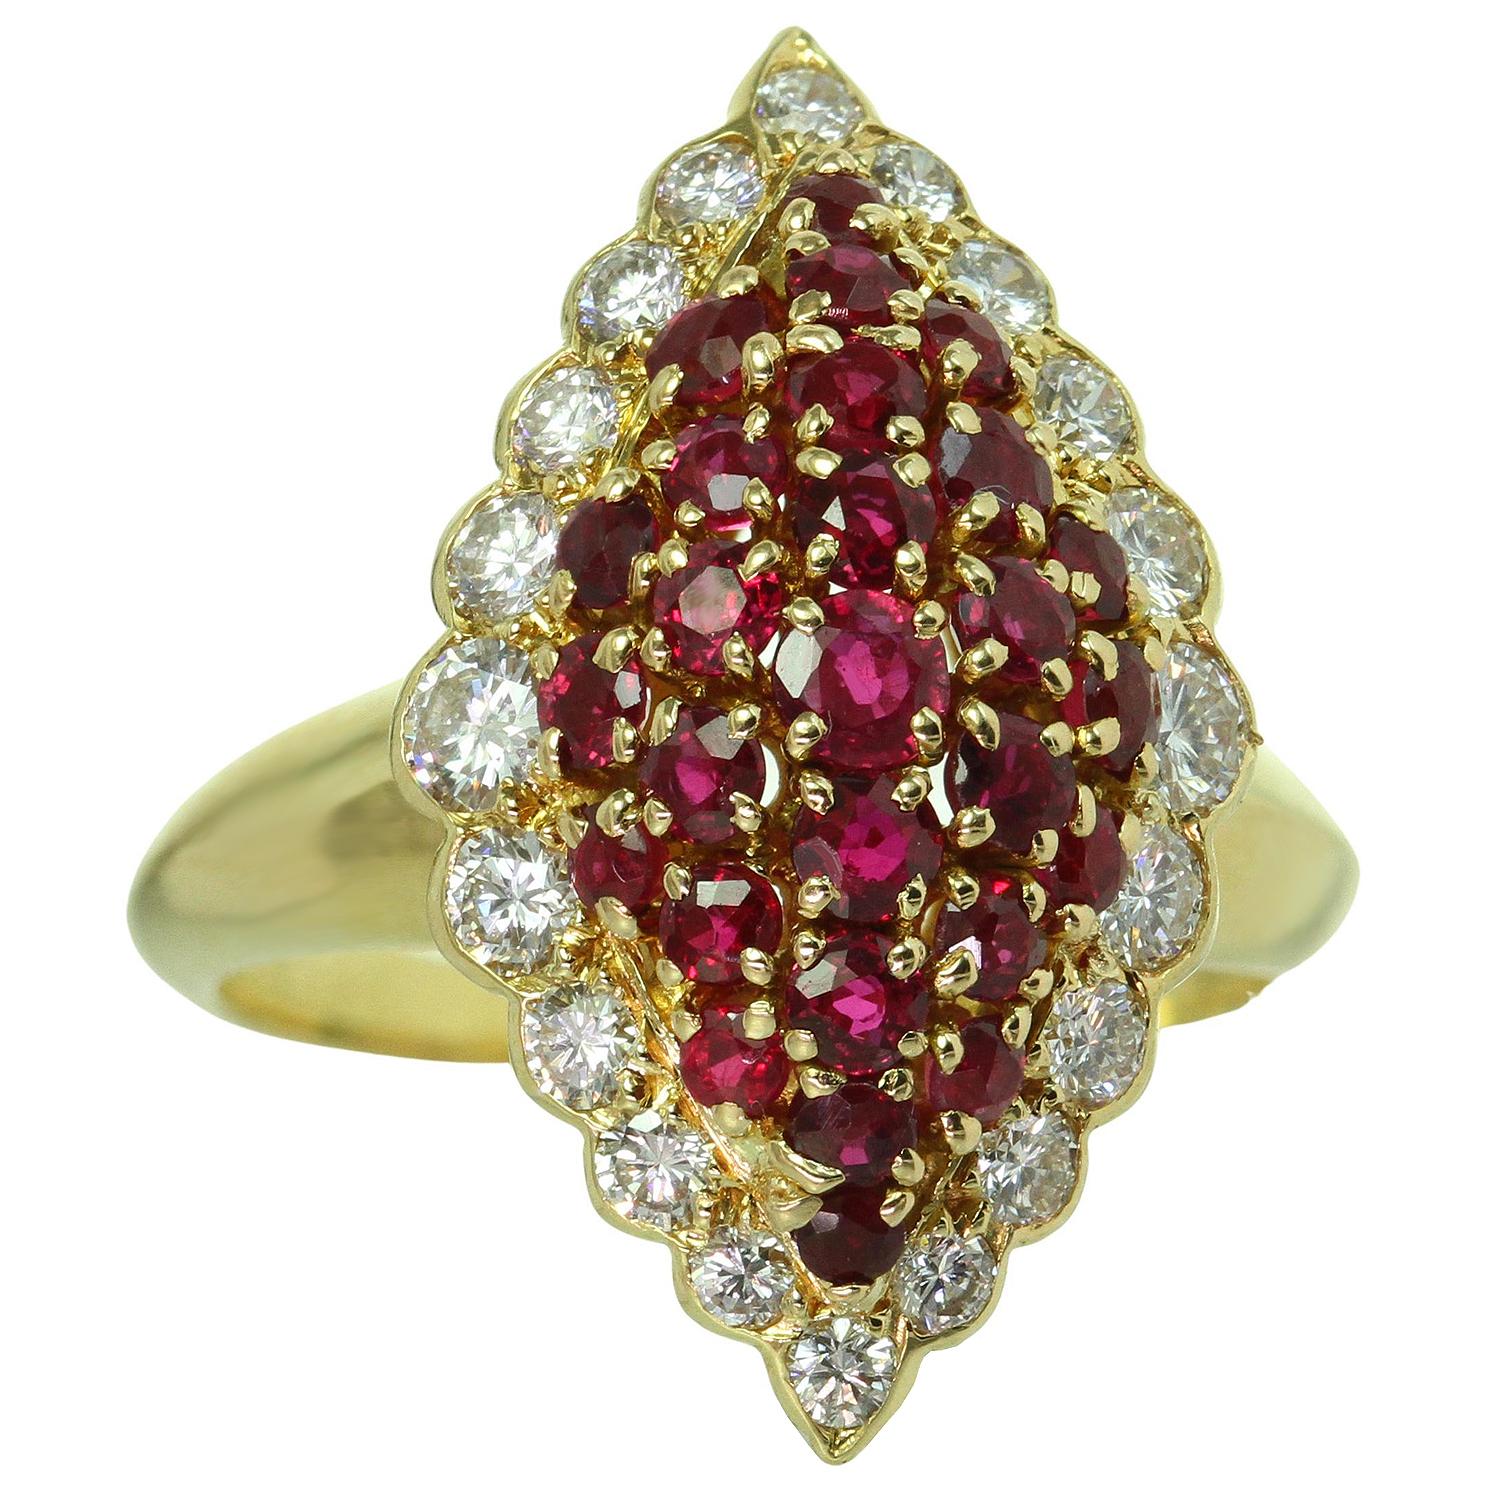 This fabulous Van Cleef & Arpels ring is crafted in 18k yellow gold and features a marquise design set with round red rubies weighing an estimated 1.29 carats and brilliant-cut round E-F VVS1-VVS2 diamonds weighing an estimated 0.66 carats. Made in